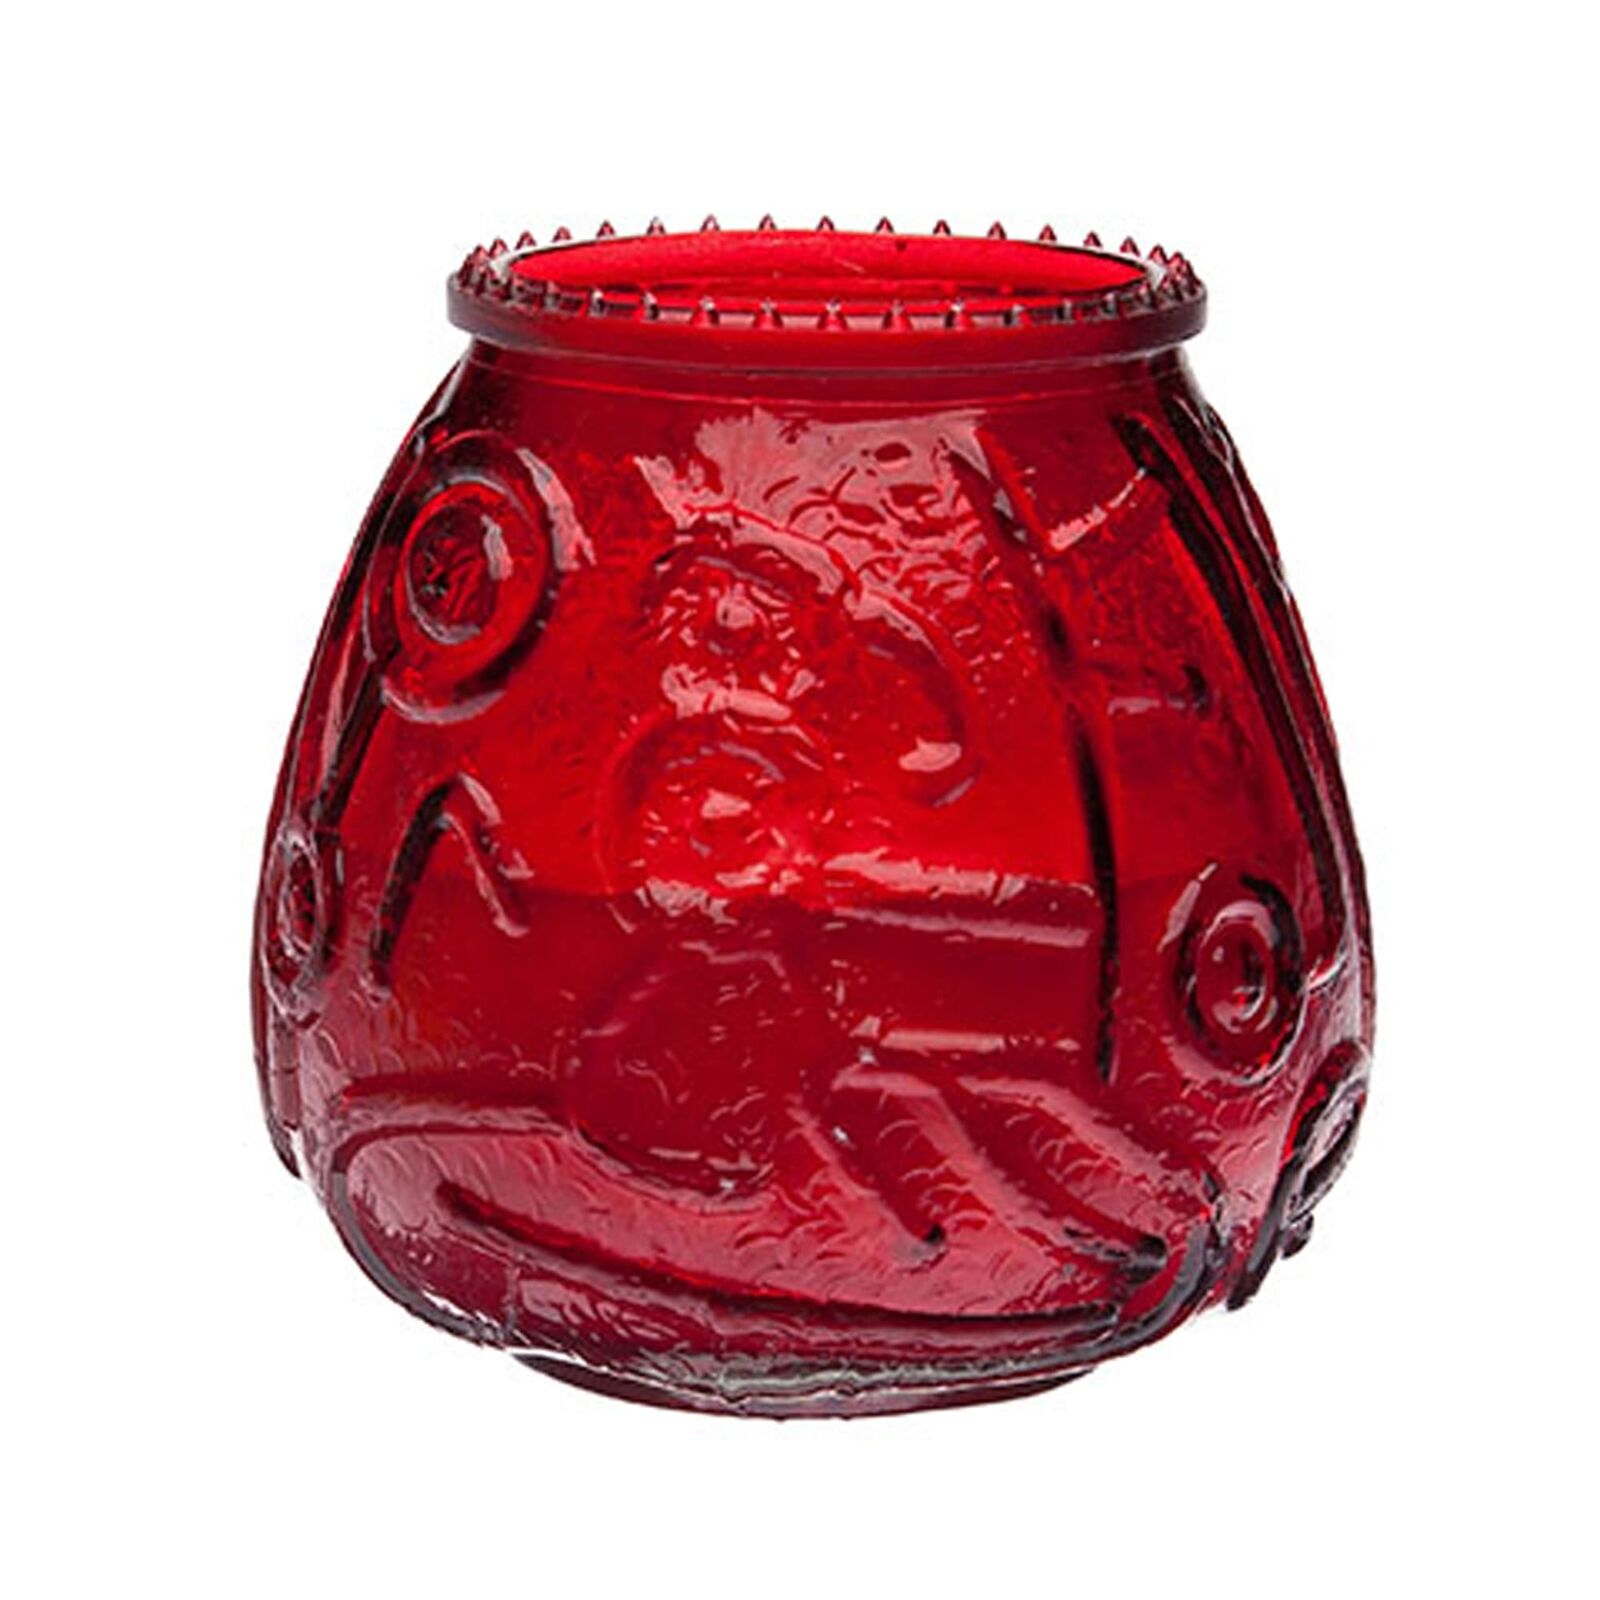 Sterno Products 40200 Euro-Venetian Red Candle - 12 / CS